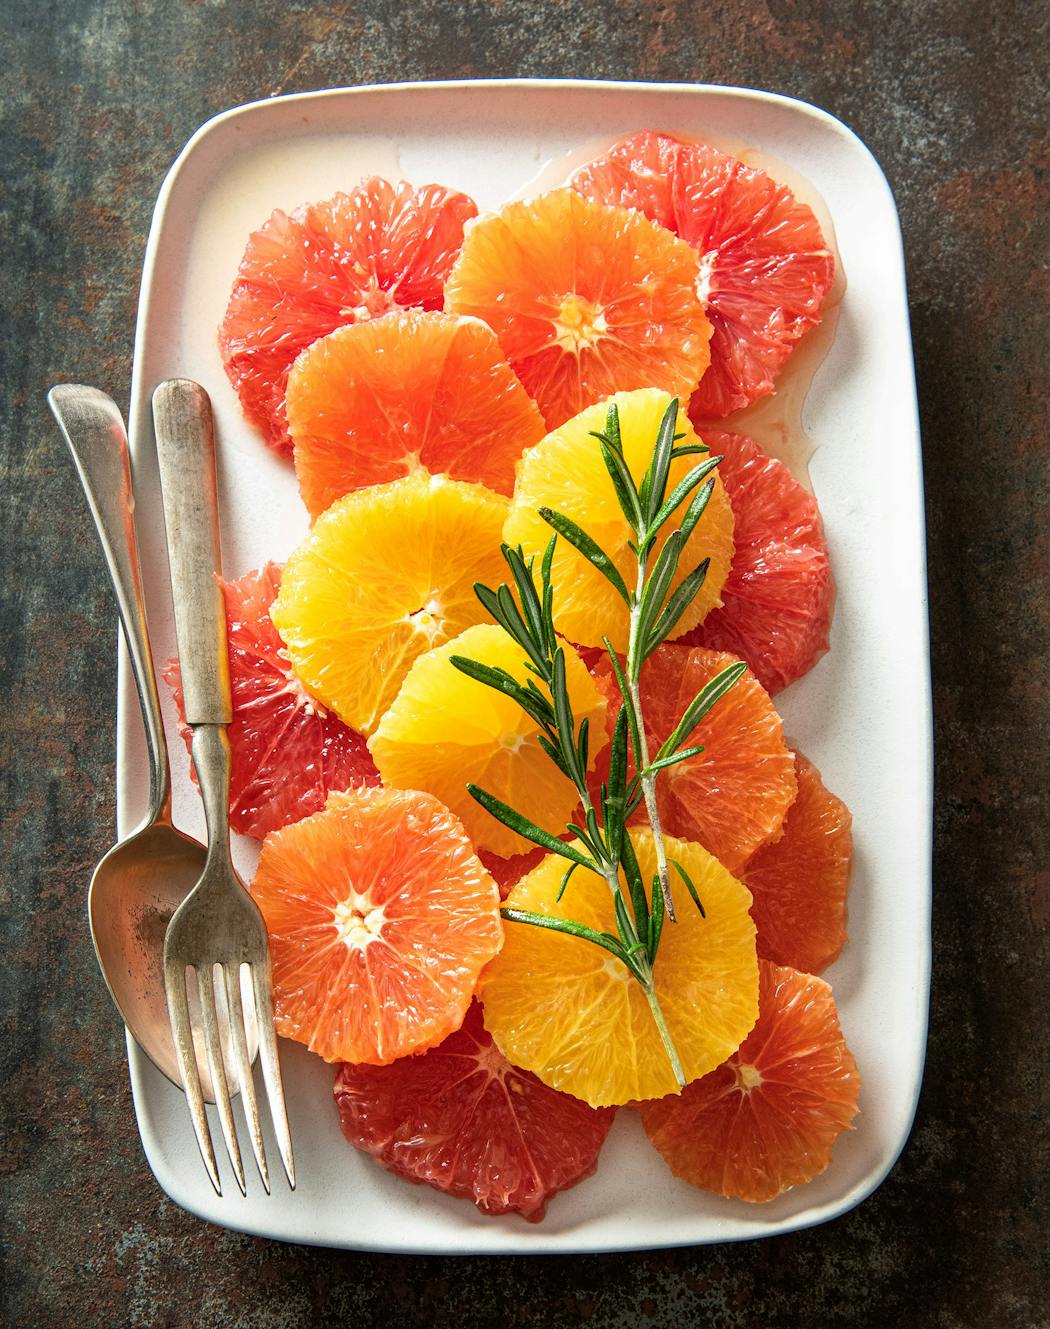 If time allows, prepare this salad a day ahead so the rosemary flavors infuse the fruit.